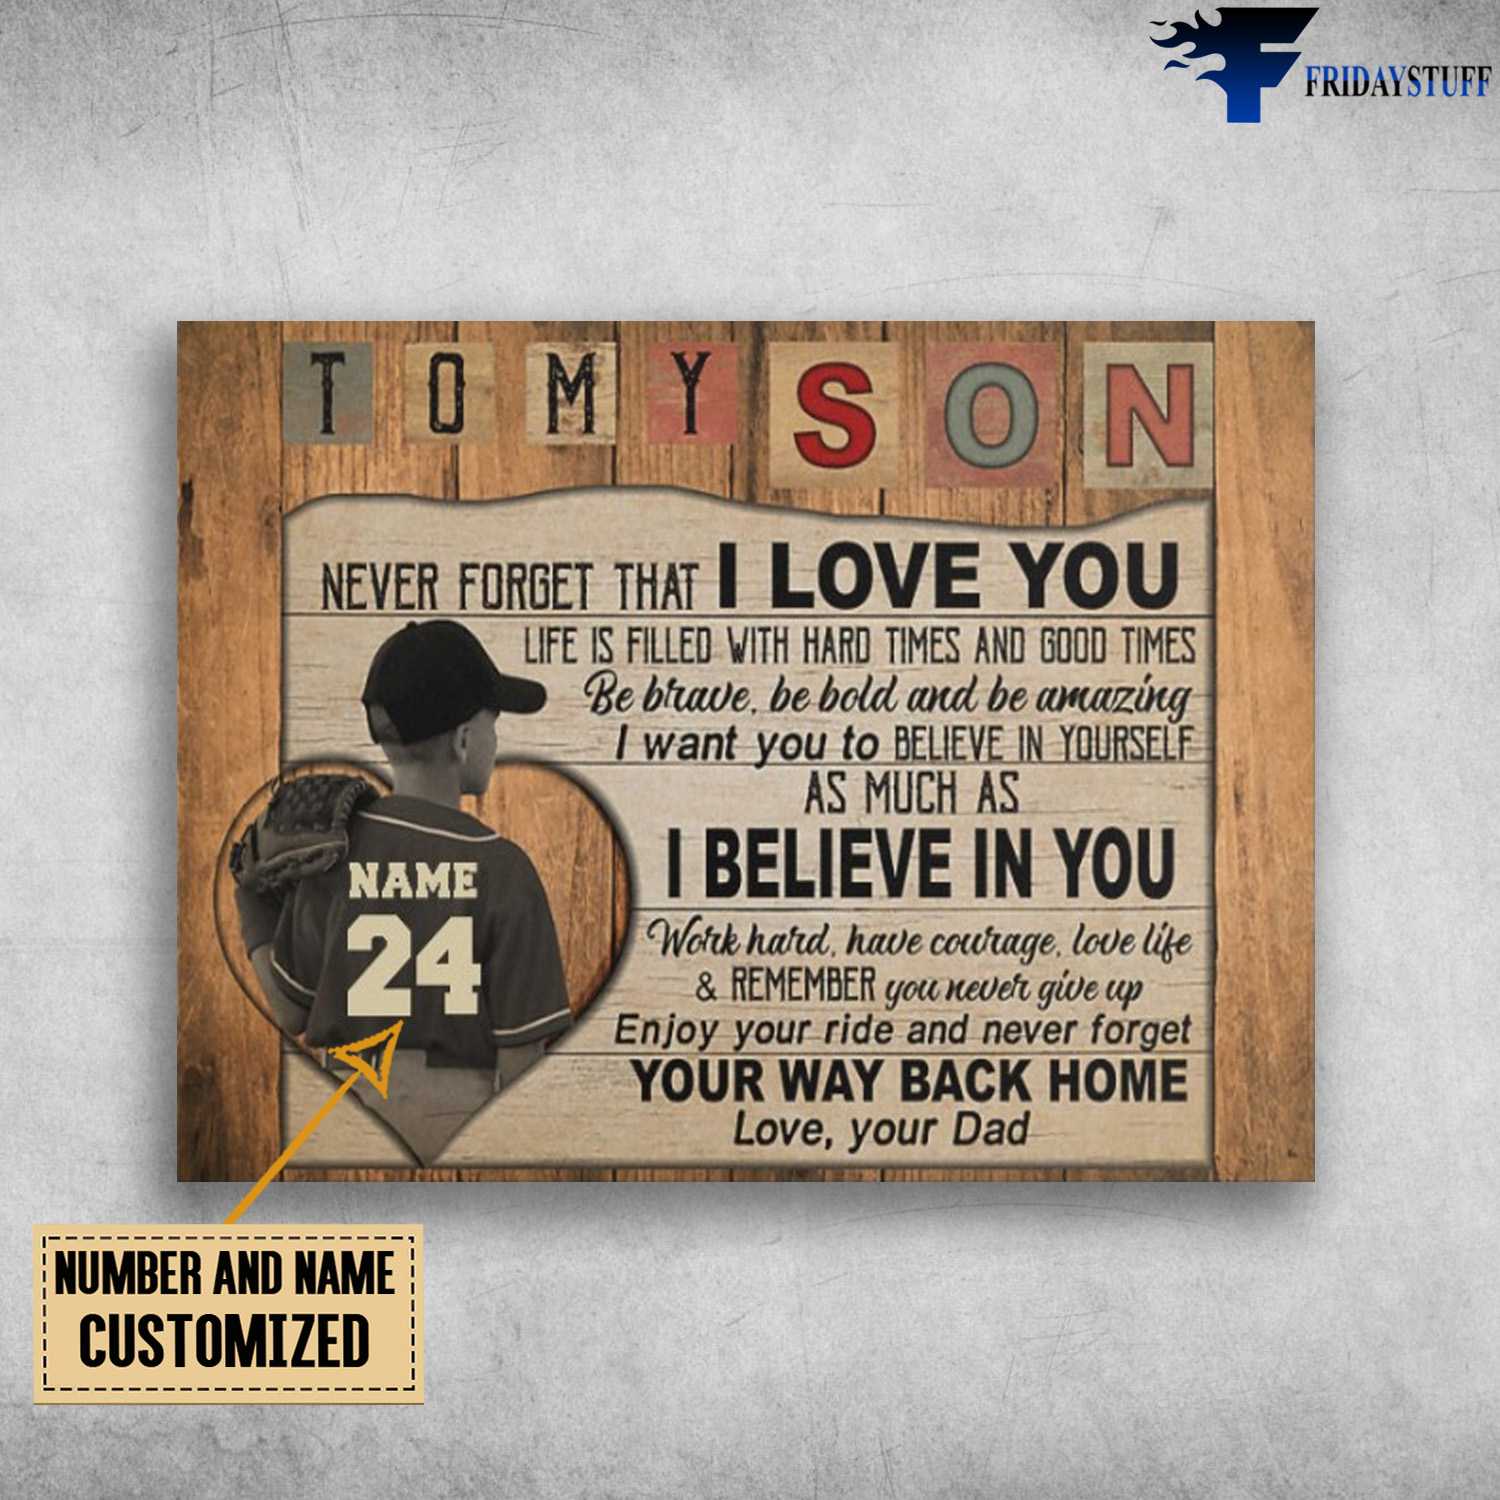 Baseball Poster, Baseball Son, To My Son, Never Forget That I Love You, Life Is Filled With Hard Times And Good Times, Be Brave, Be Bold, And Be Amazing